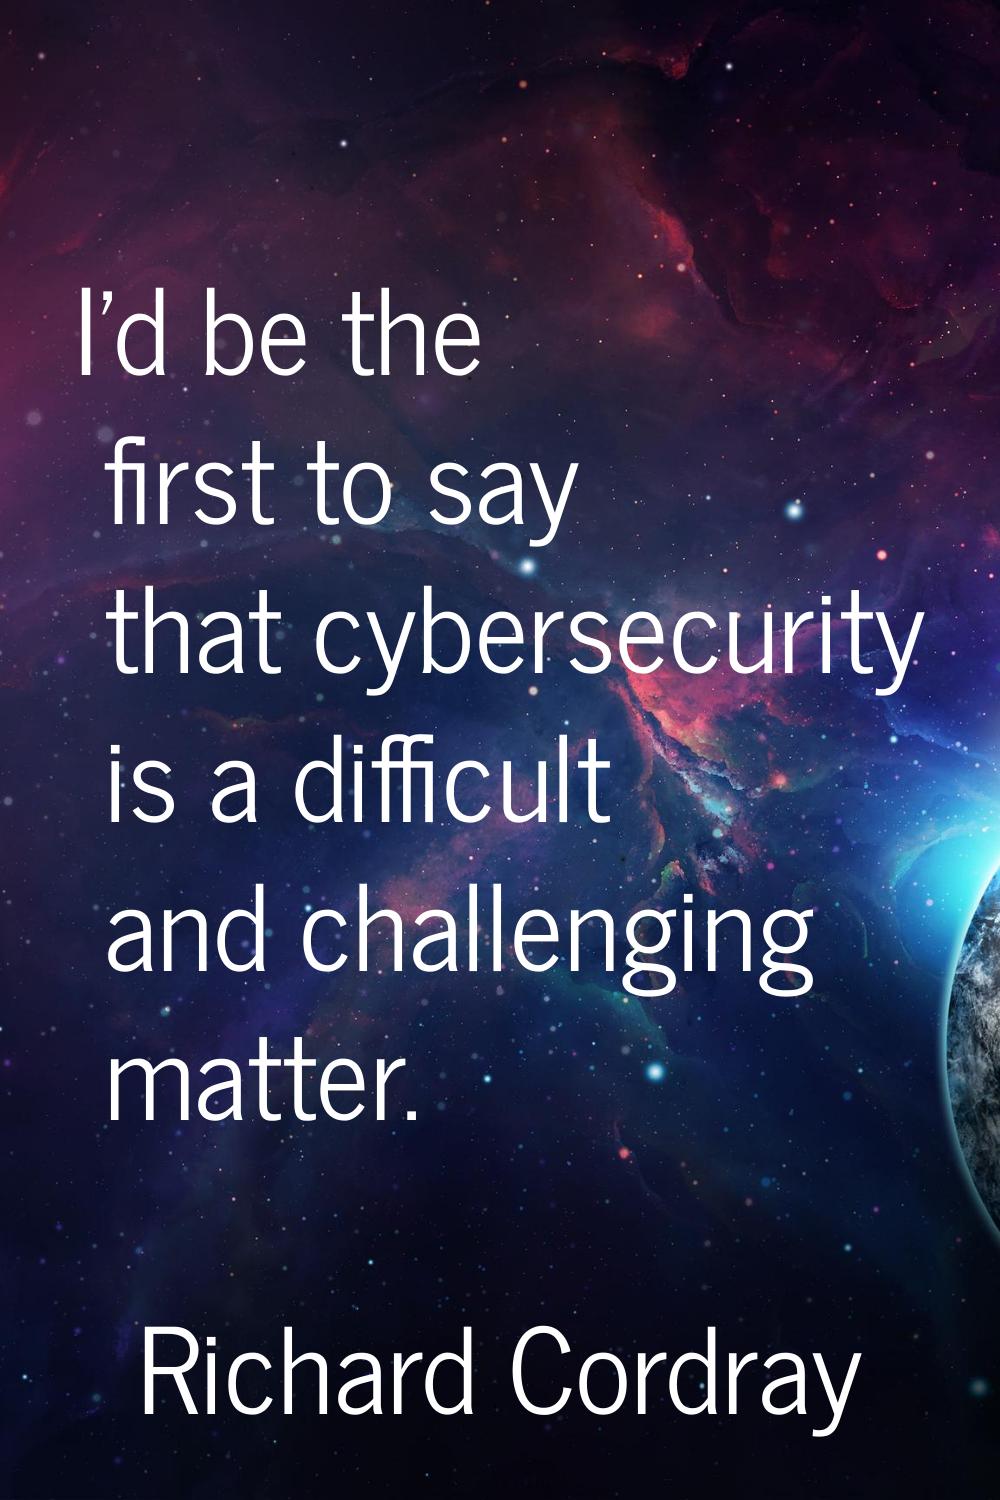 I'd be the first to say that cybersecurity is a difficult and challenging matter.